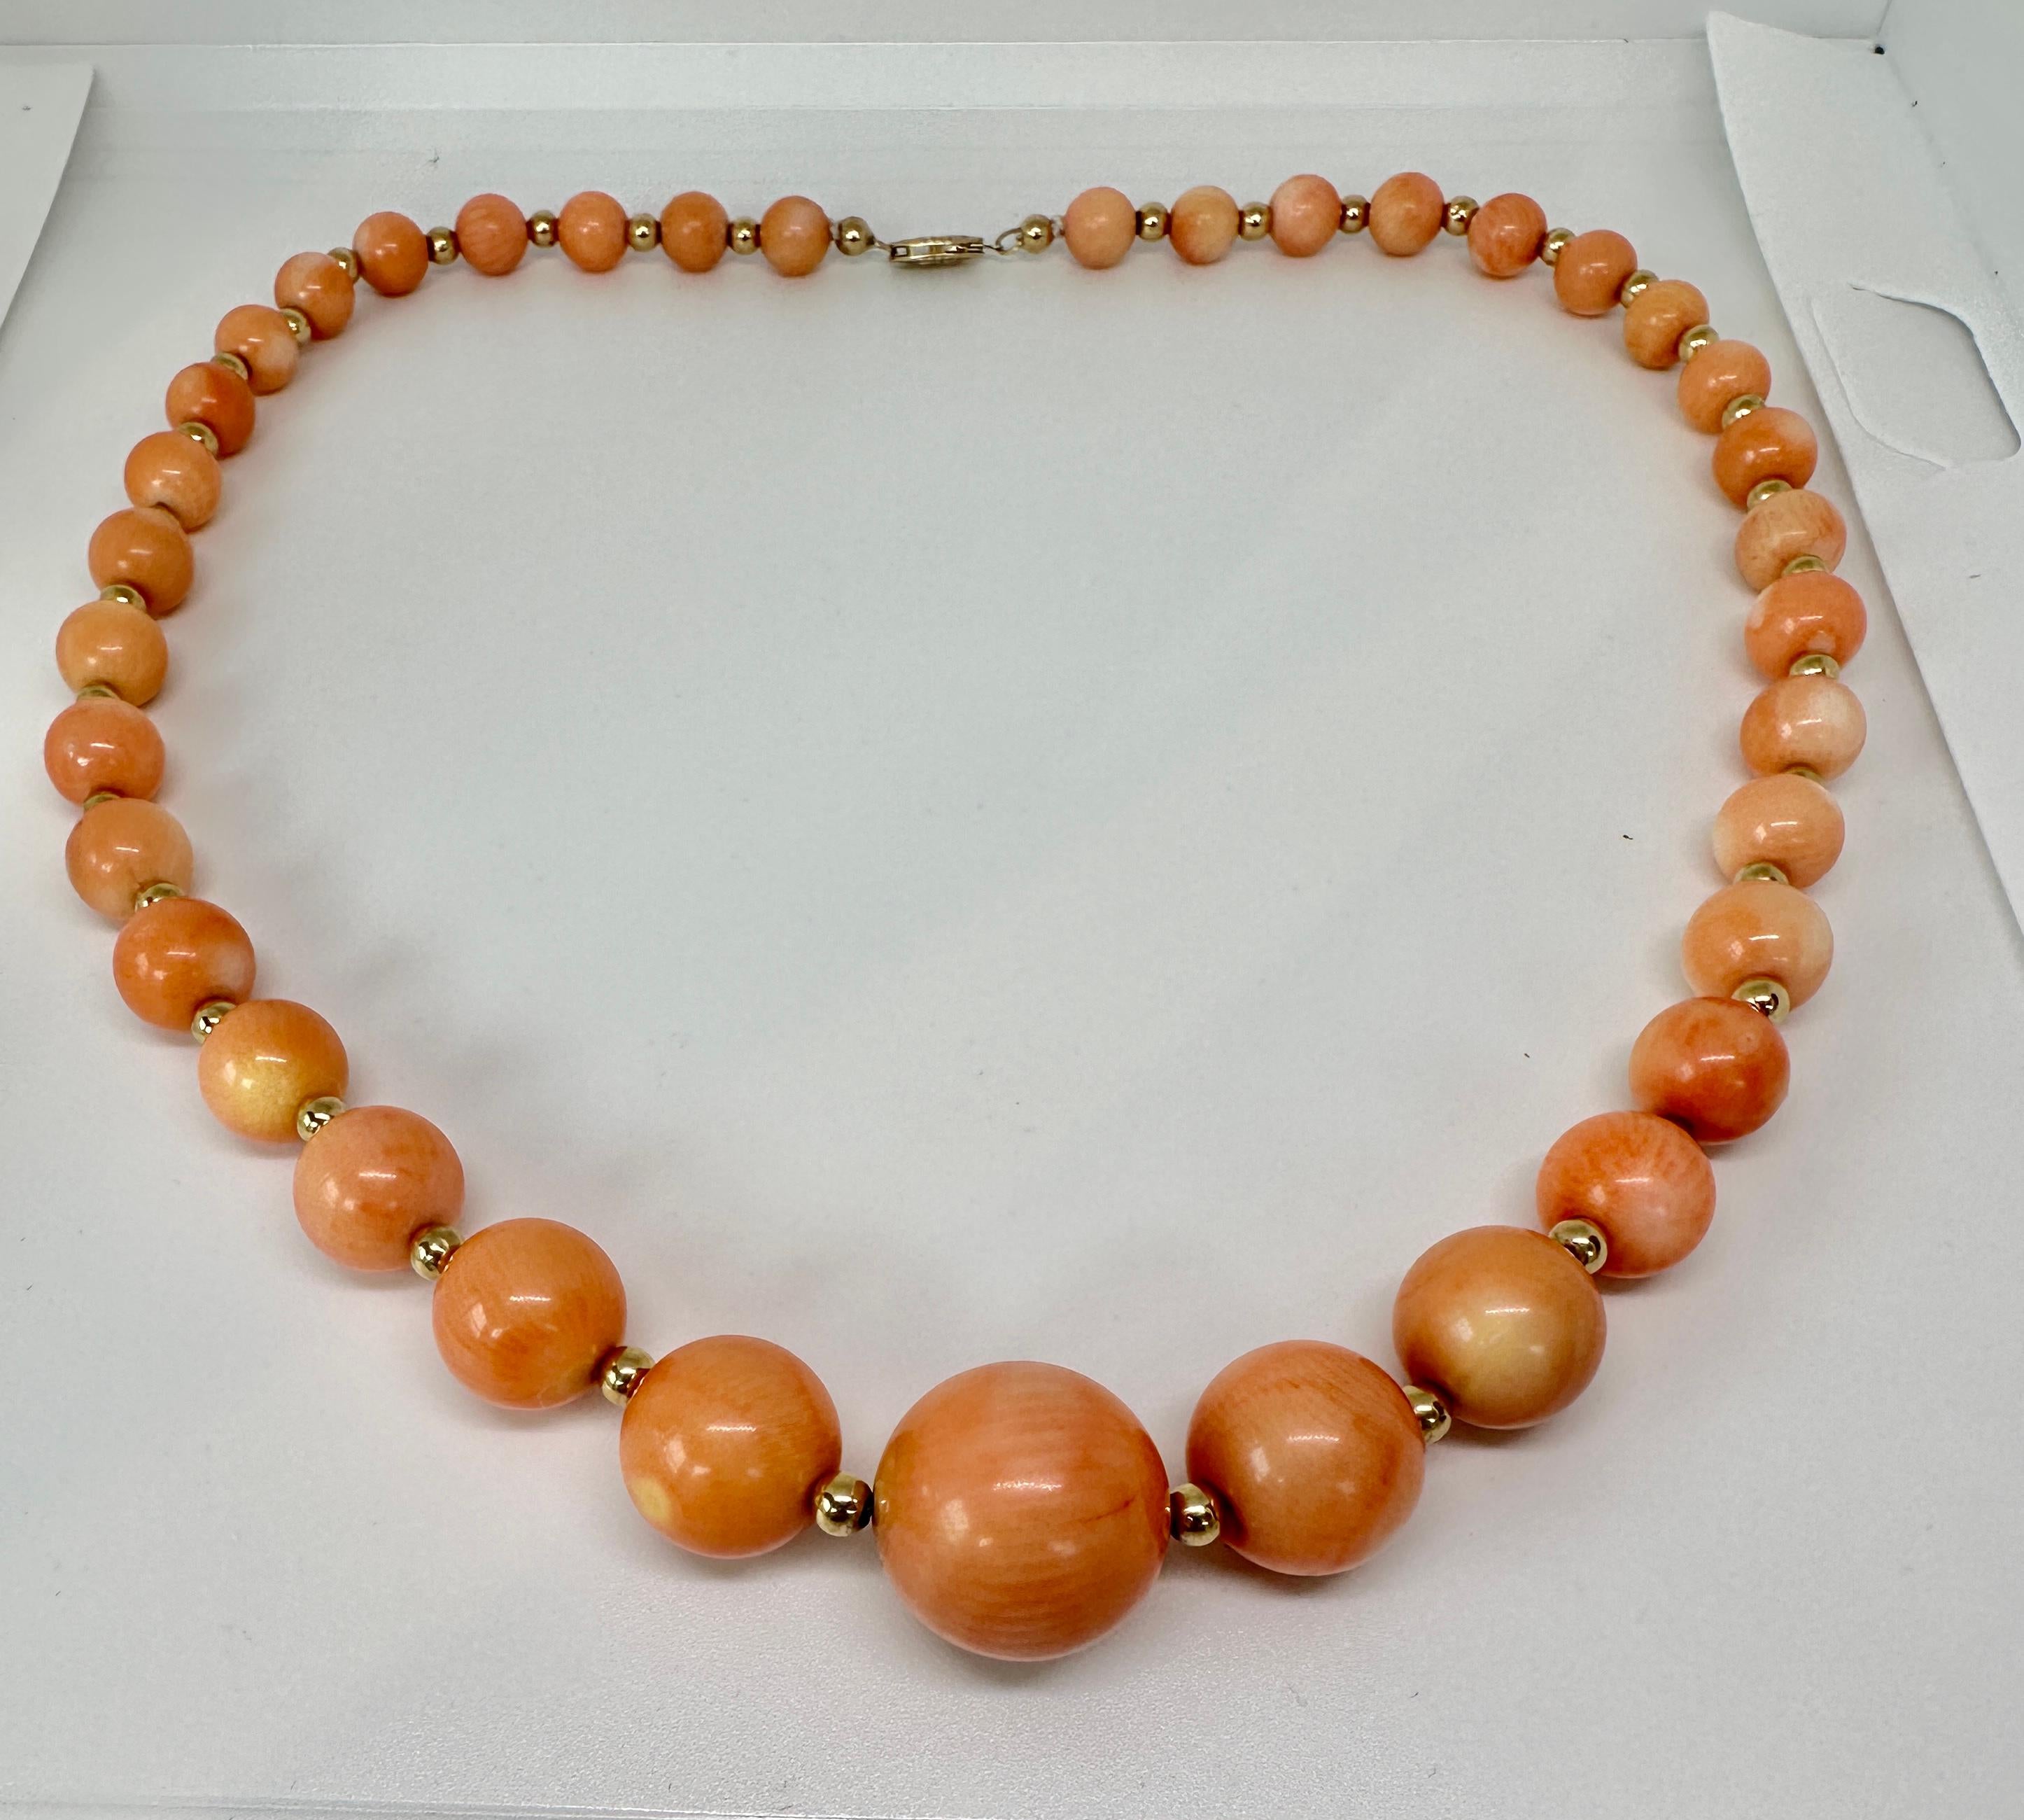 Indulge in this significant antique pink natural 18 mm Momo Coral and 14 Karat Gold Necklace.  The marbled pattern on each bead will send you to bliss with its charming beauty and appeal.  The magnificent Momo Coral beads are graduated from 8mm to